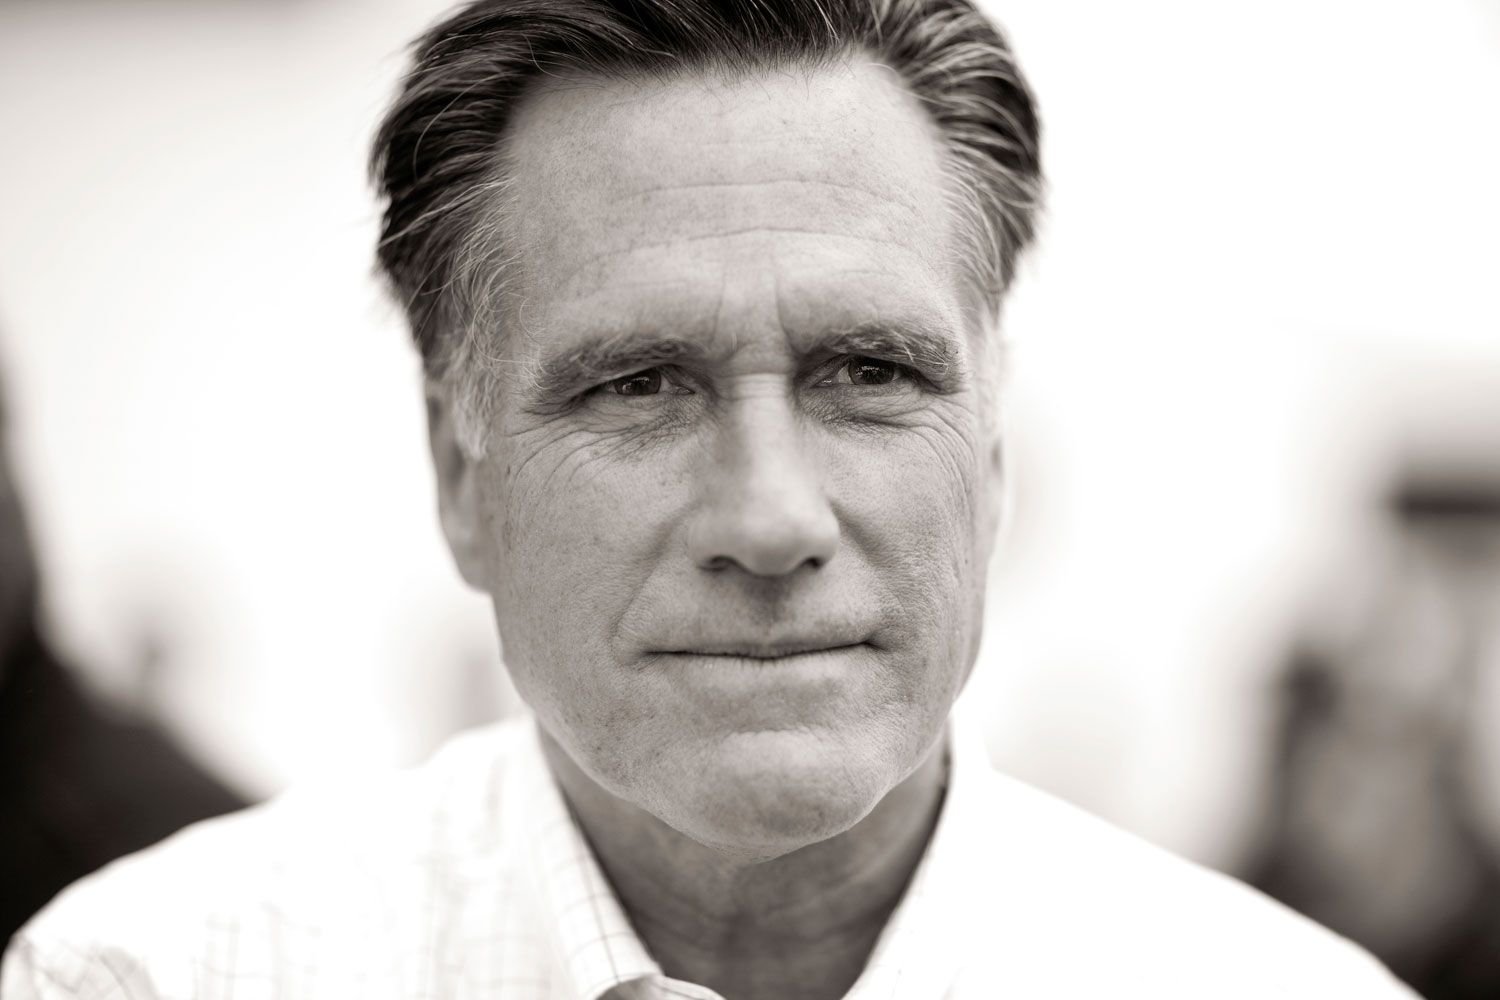 Image: Mitt Romney announces that he is formally entering the race for the 2012 Republican U.S. presidential nomination in Stratham, N.H. June 2, 2011.